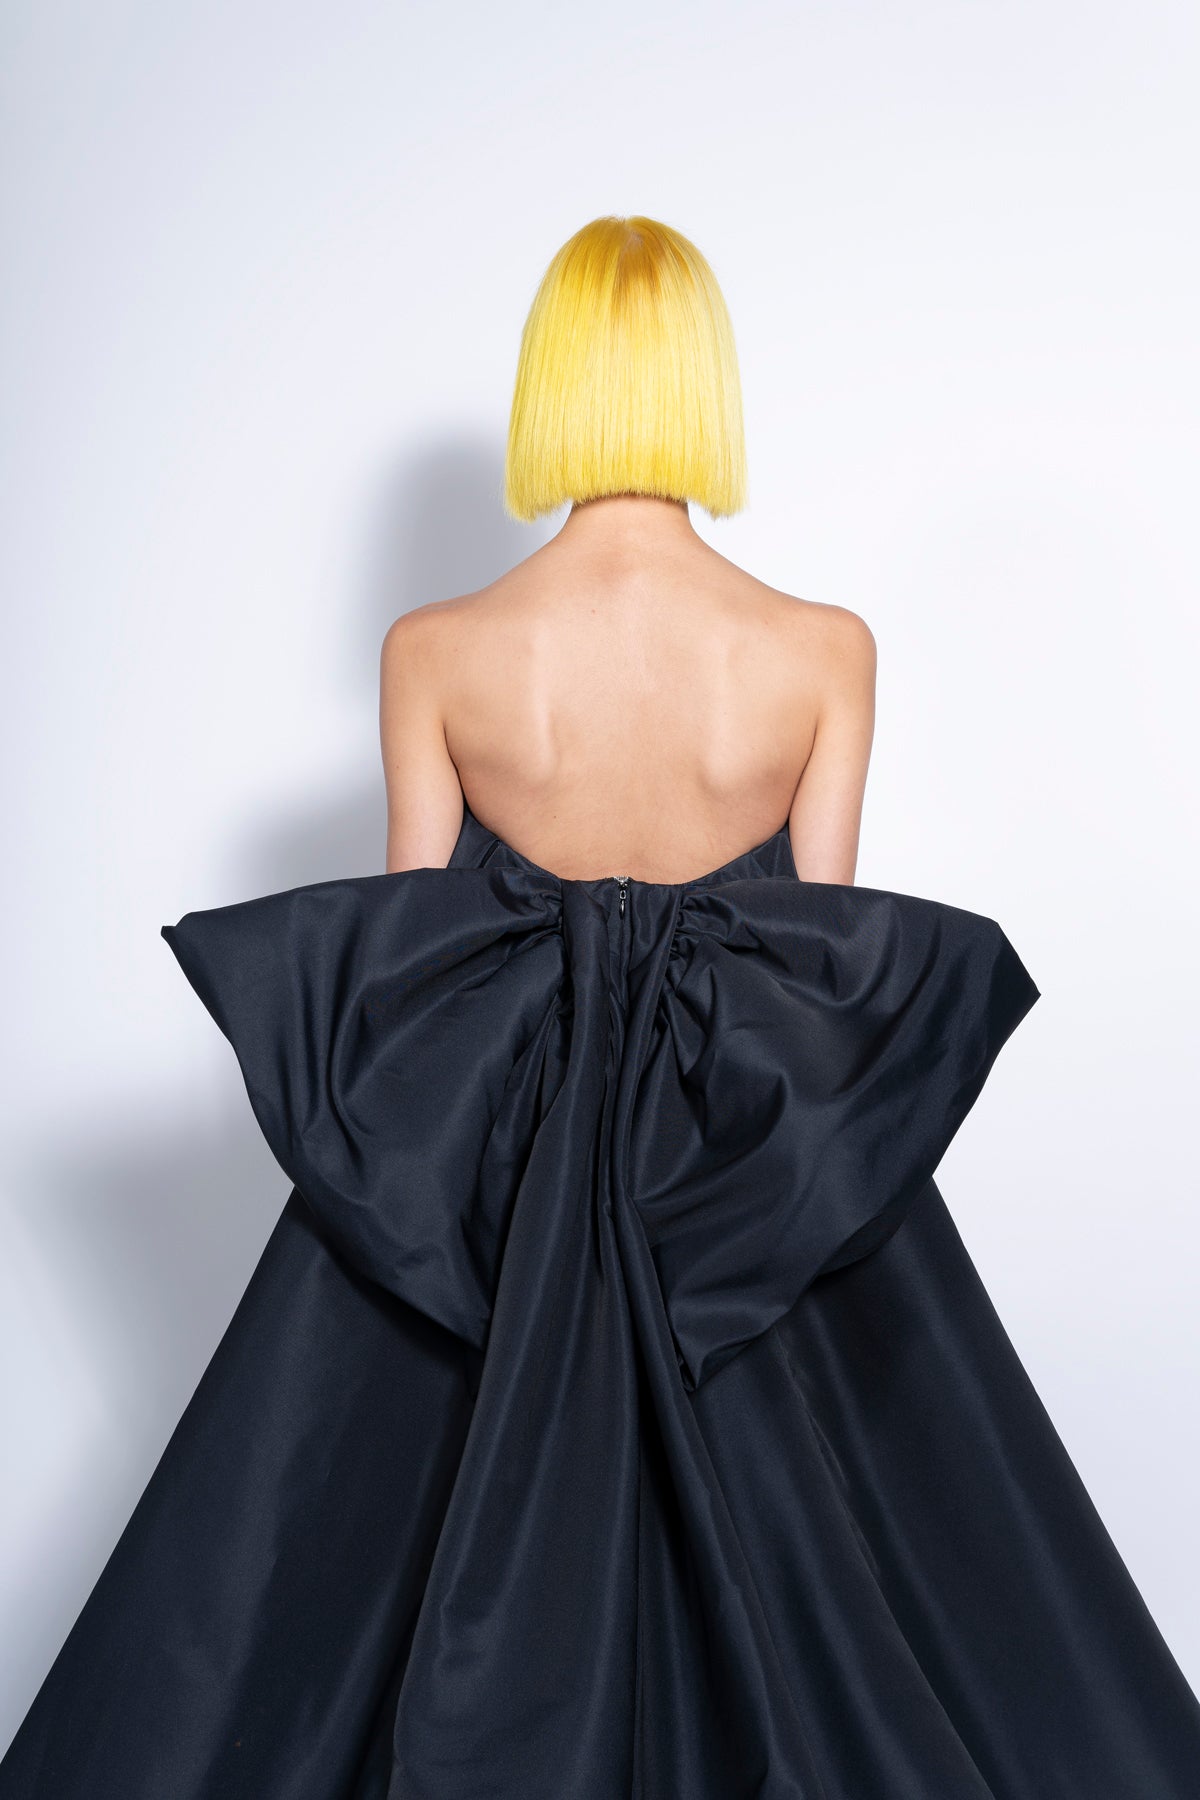 BLACK DRESS WITH GIANT BOW IN THE BACK marques almeida